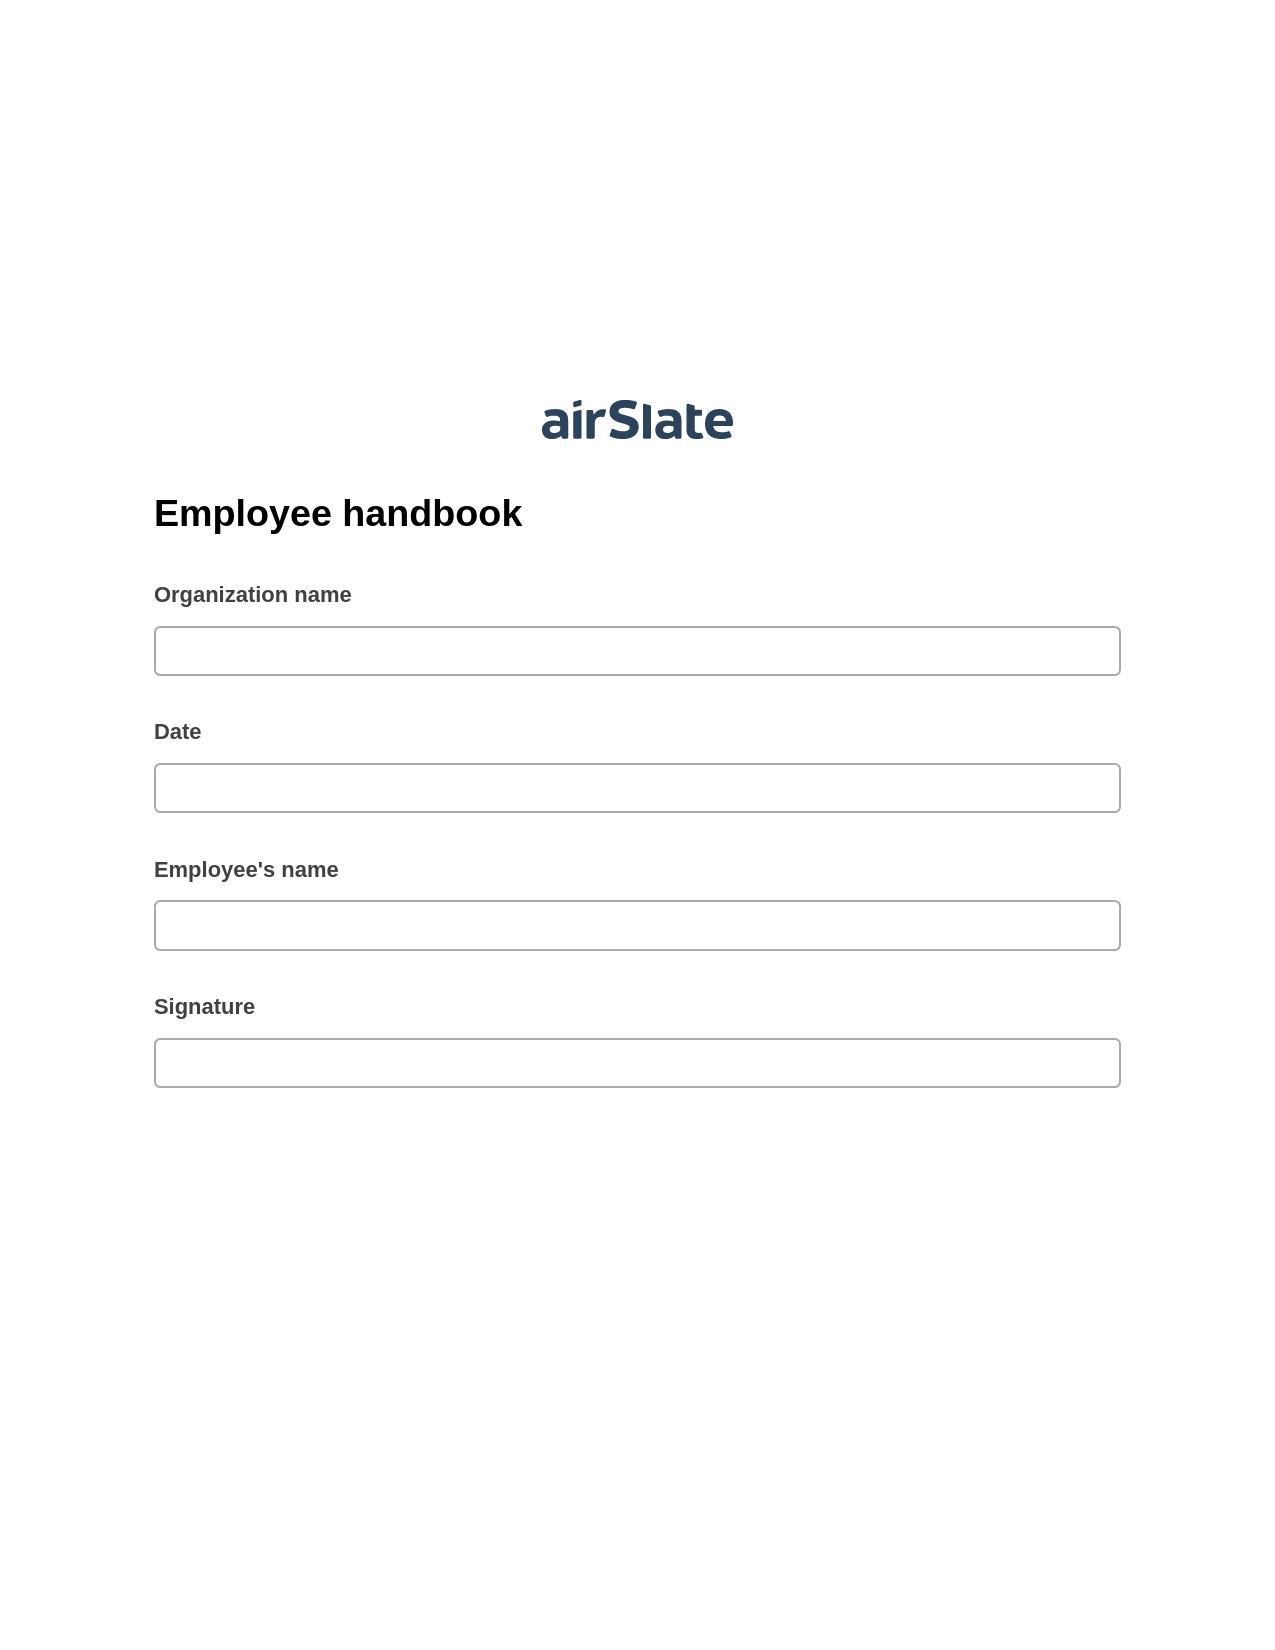 Employee handbook Pre-fill Document Bot, Create Salesforce Record Bot, Export to NetSuite Record Bot